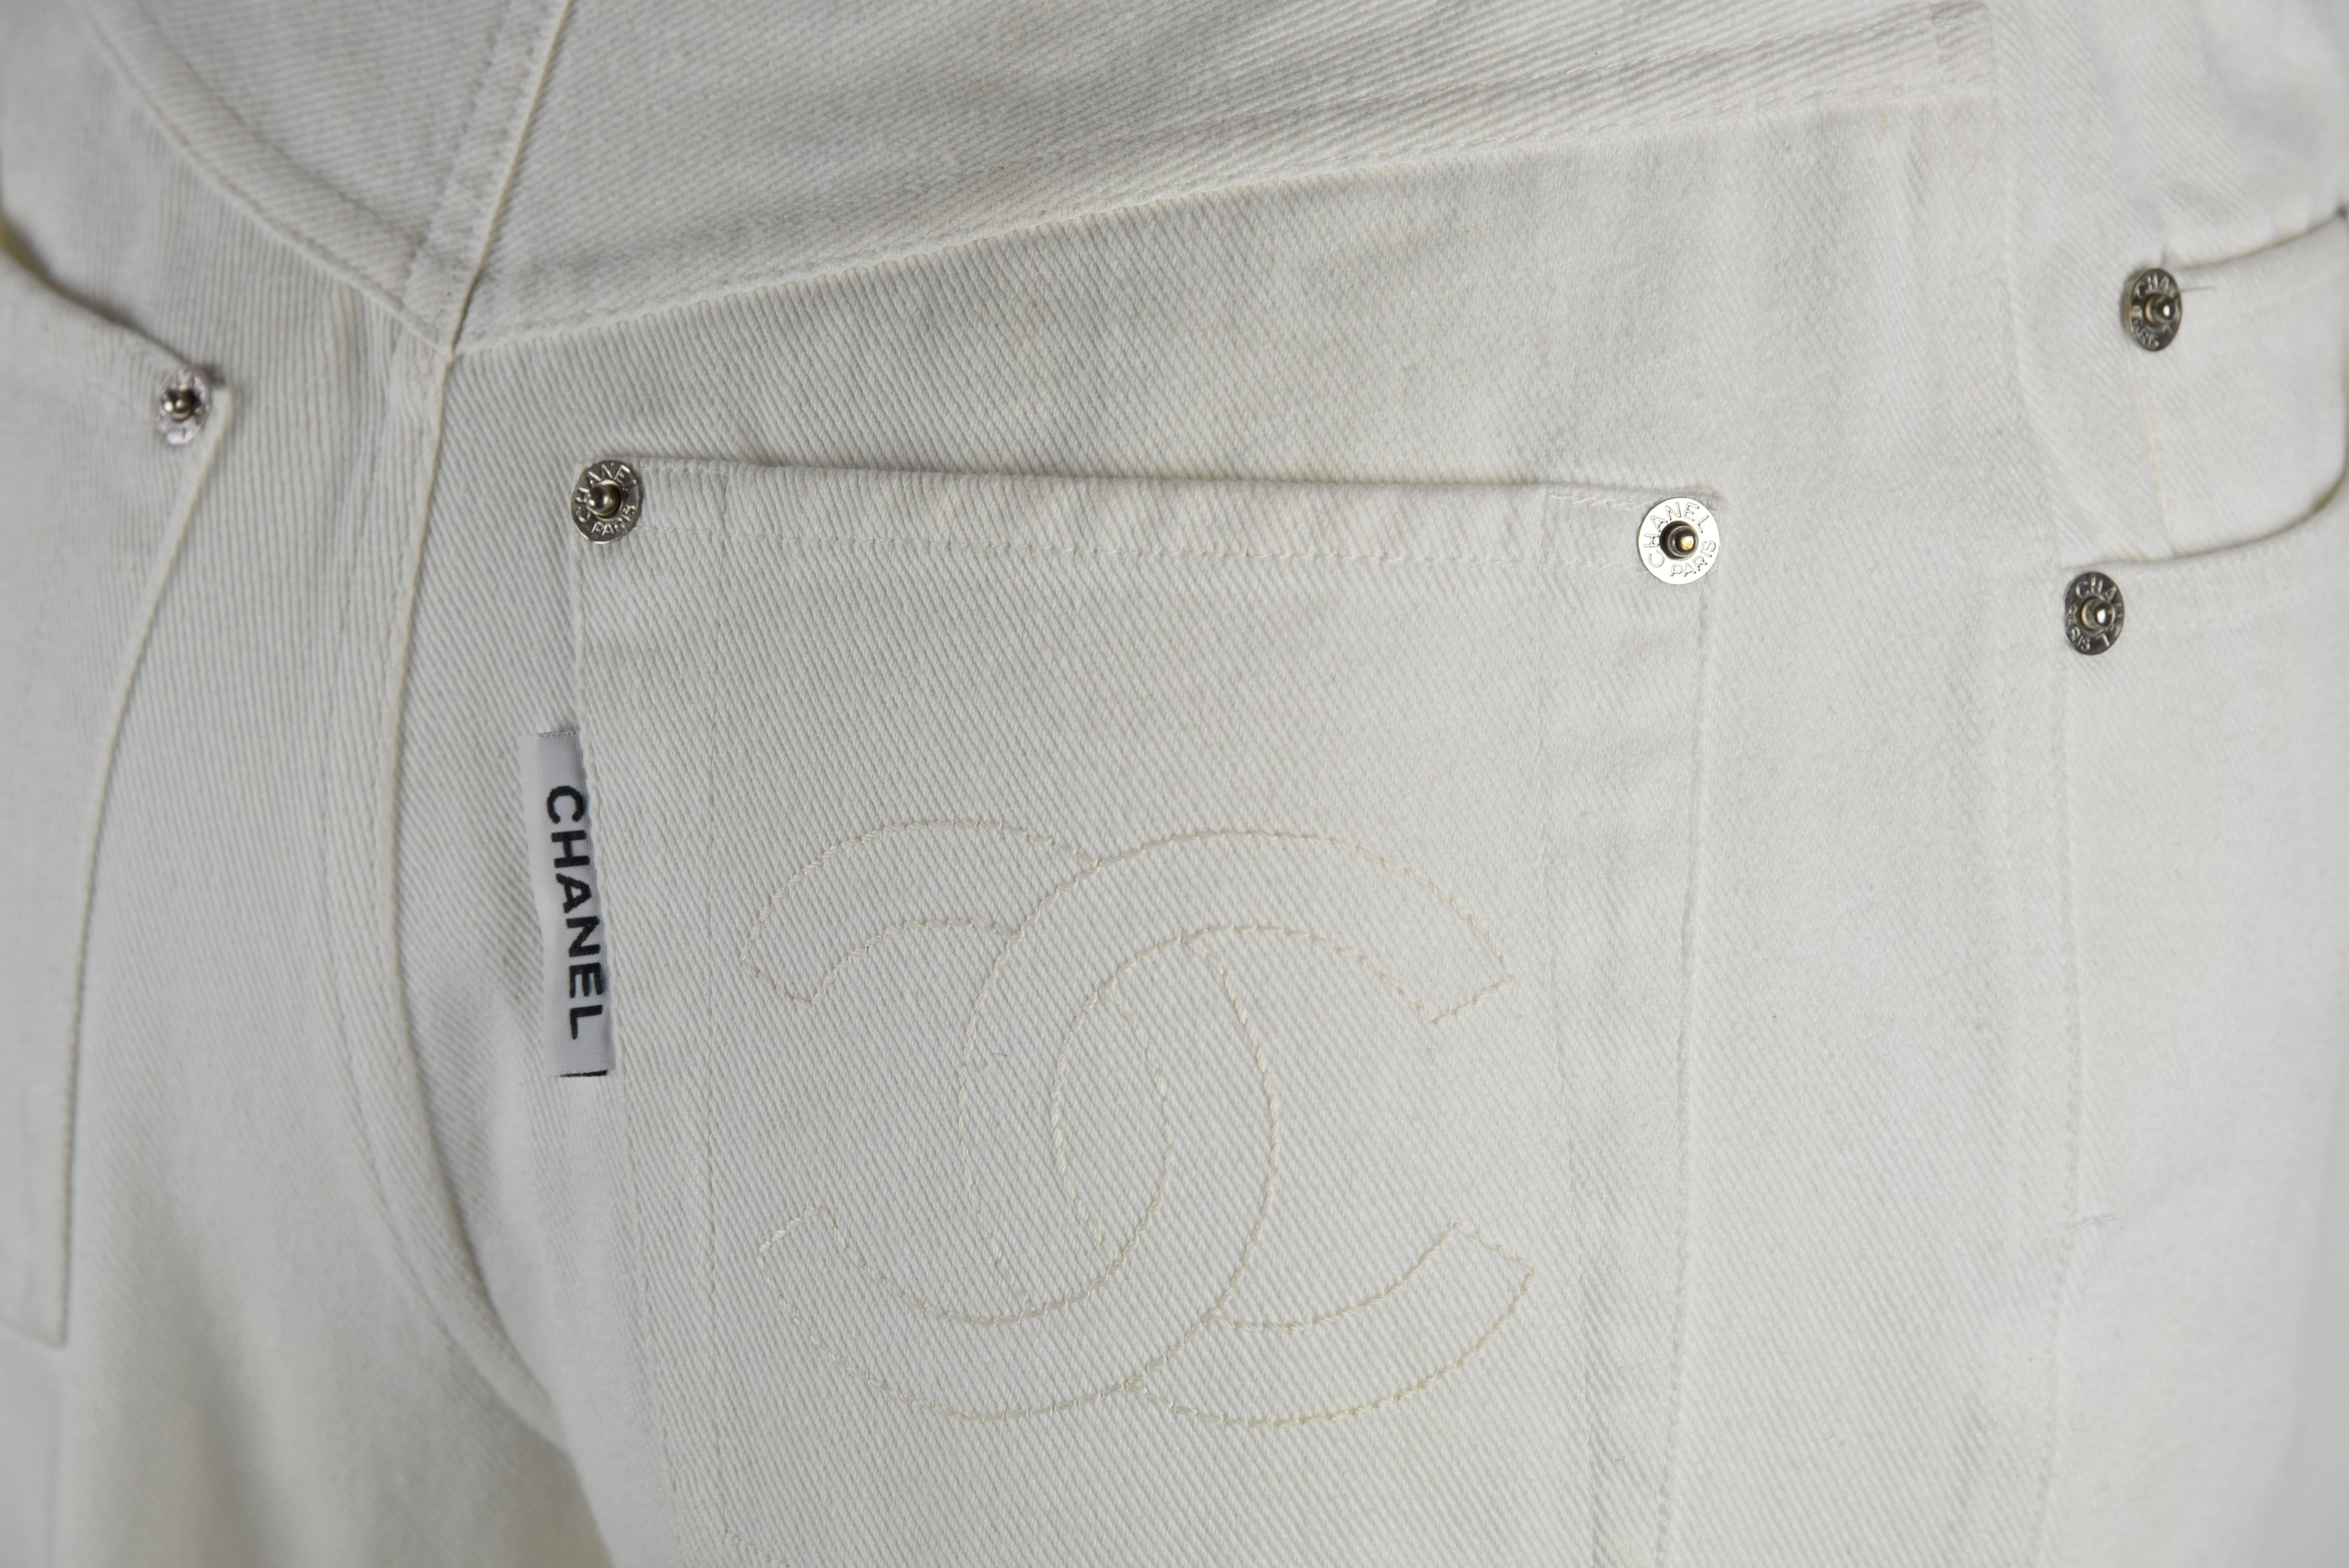 Chanel 1995P White Twill Cotton Jeans with Silver Belt Buckle & CC Pocket FR38 In Excellent Condition For Sale In Portland, OR